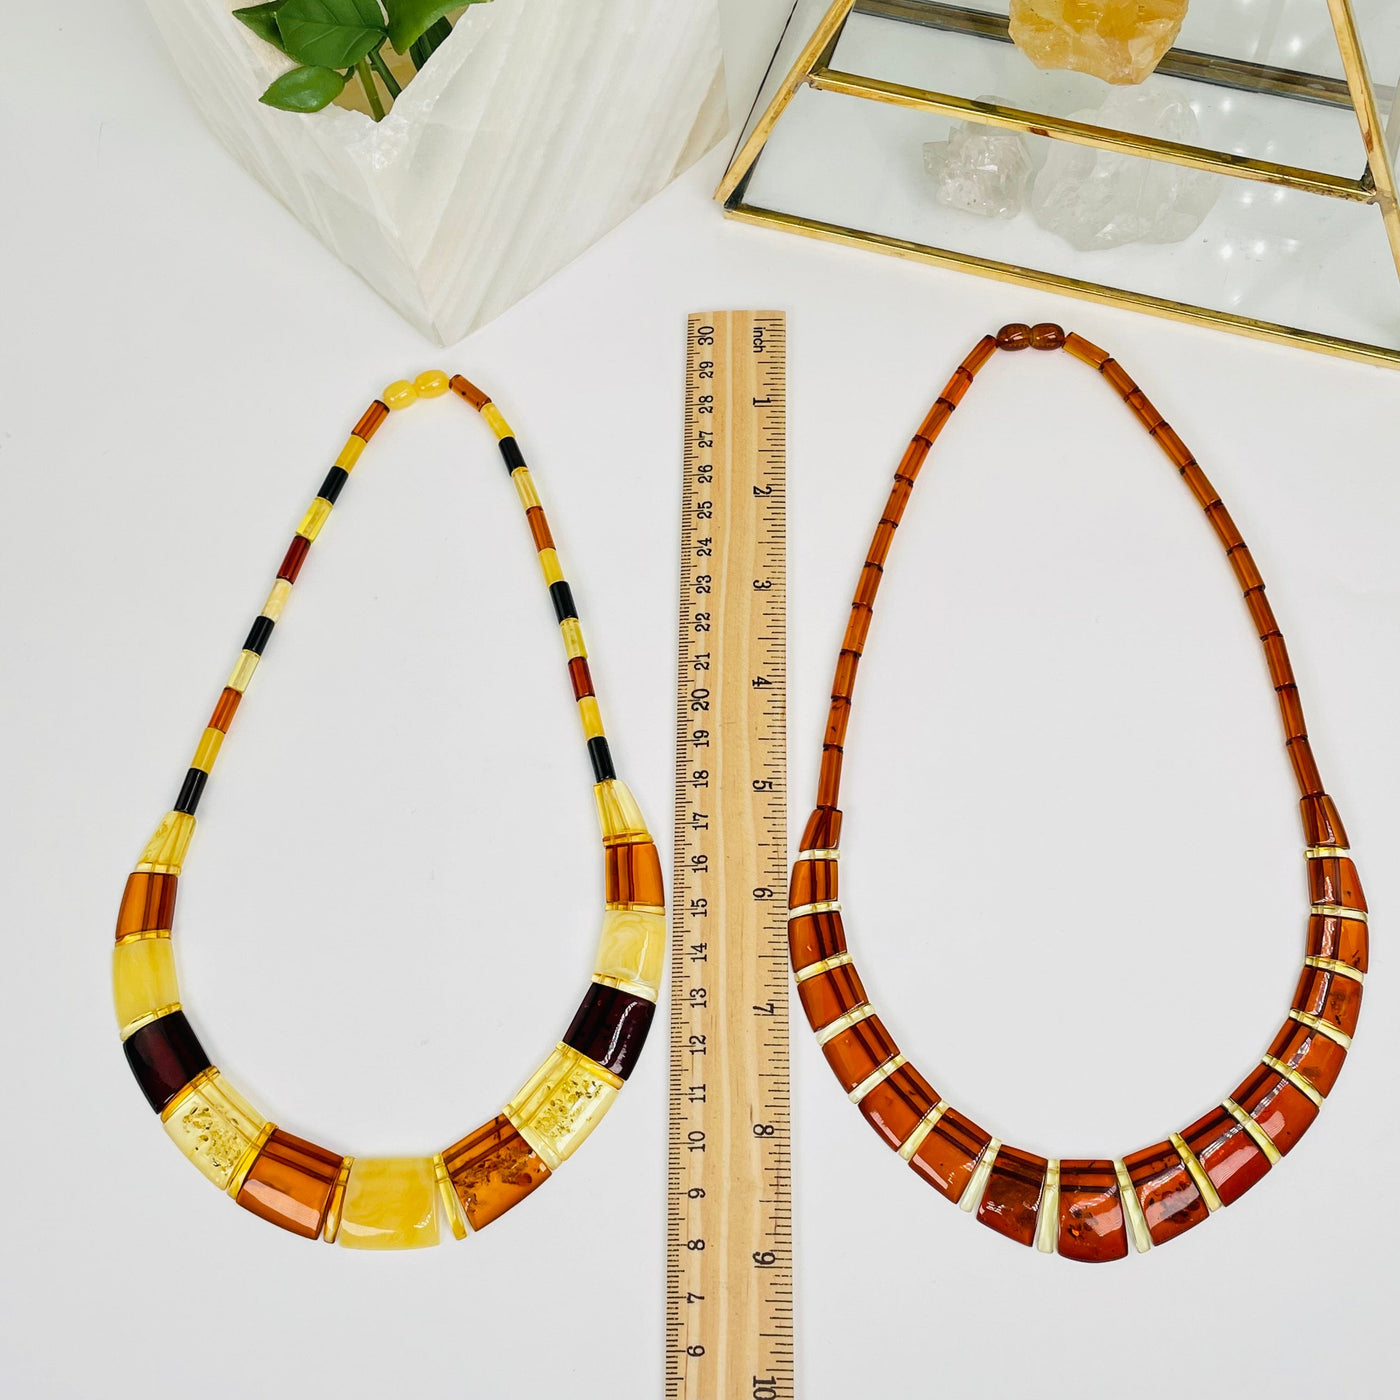 amber necklaces next to a ruler for size reference 